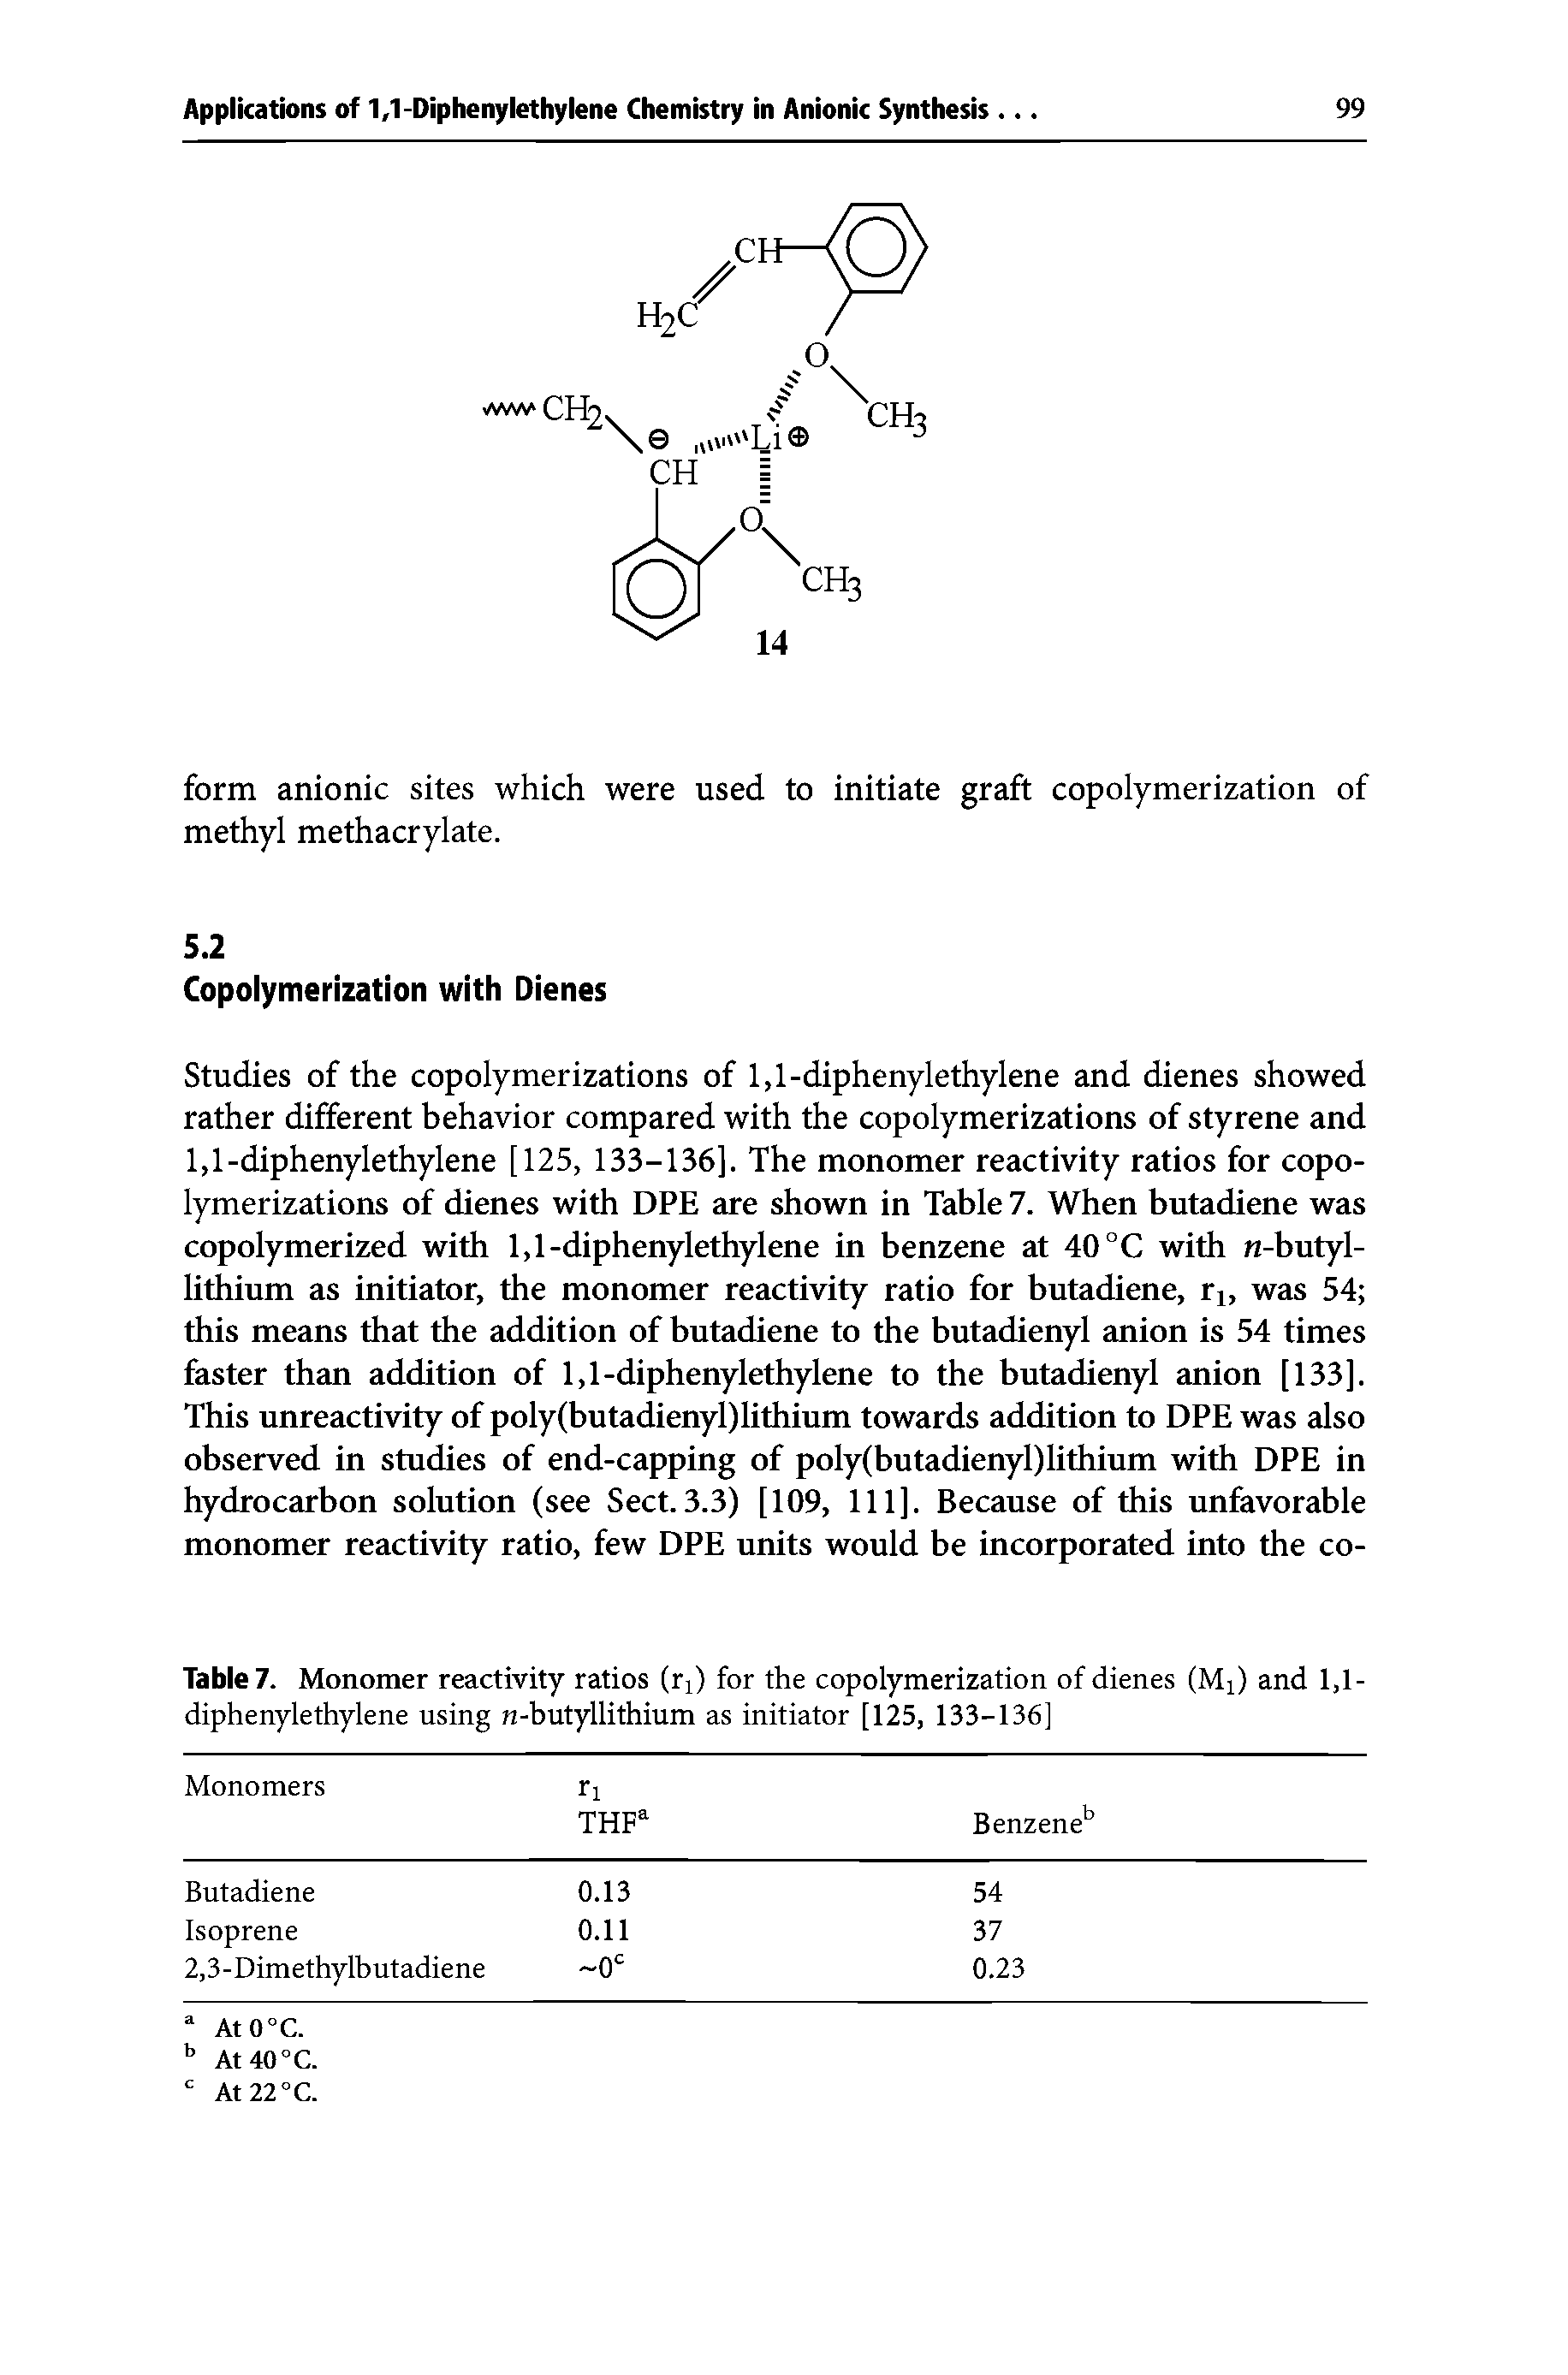 Table7. Monomer reactivity ratios (ri) for the copolymerization of dienes (Mi) and 1,1-diphenylethylene using n-butyllithium as initiator [125, 133-136]...